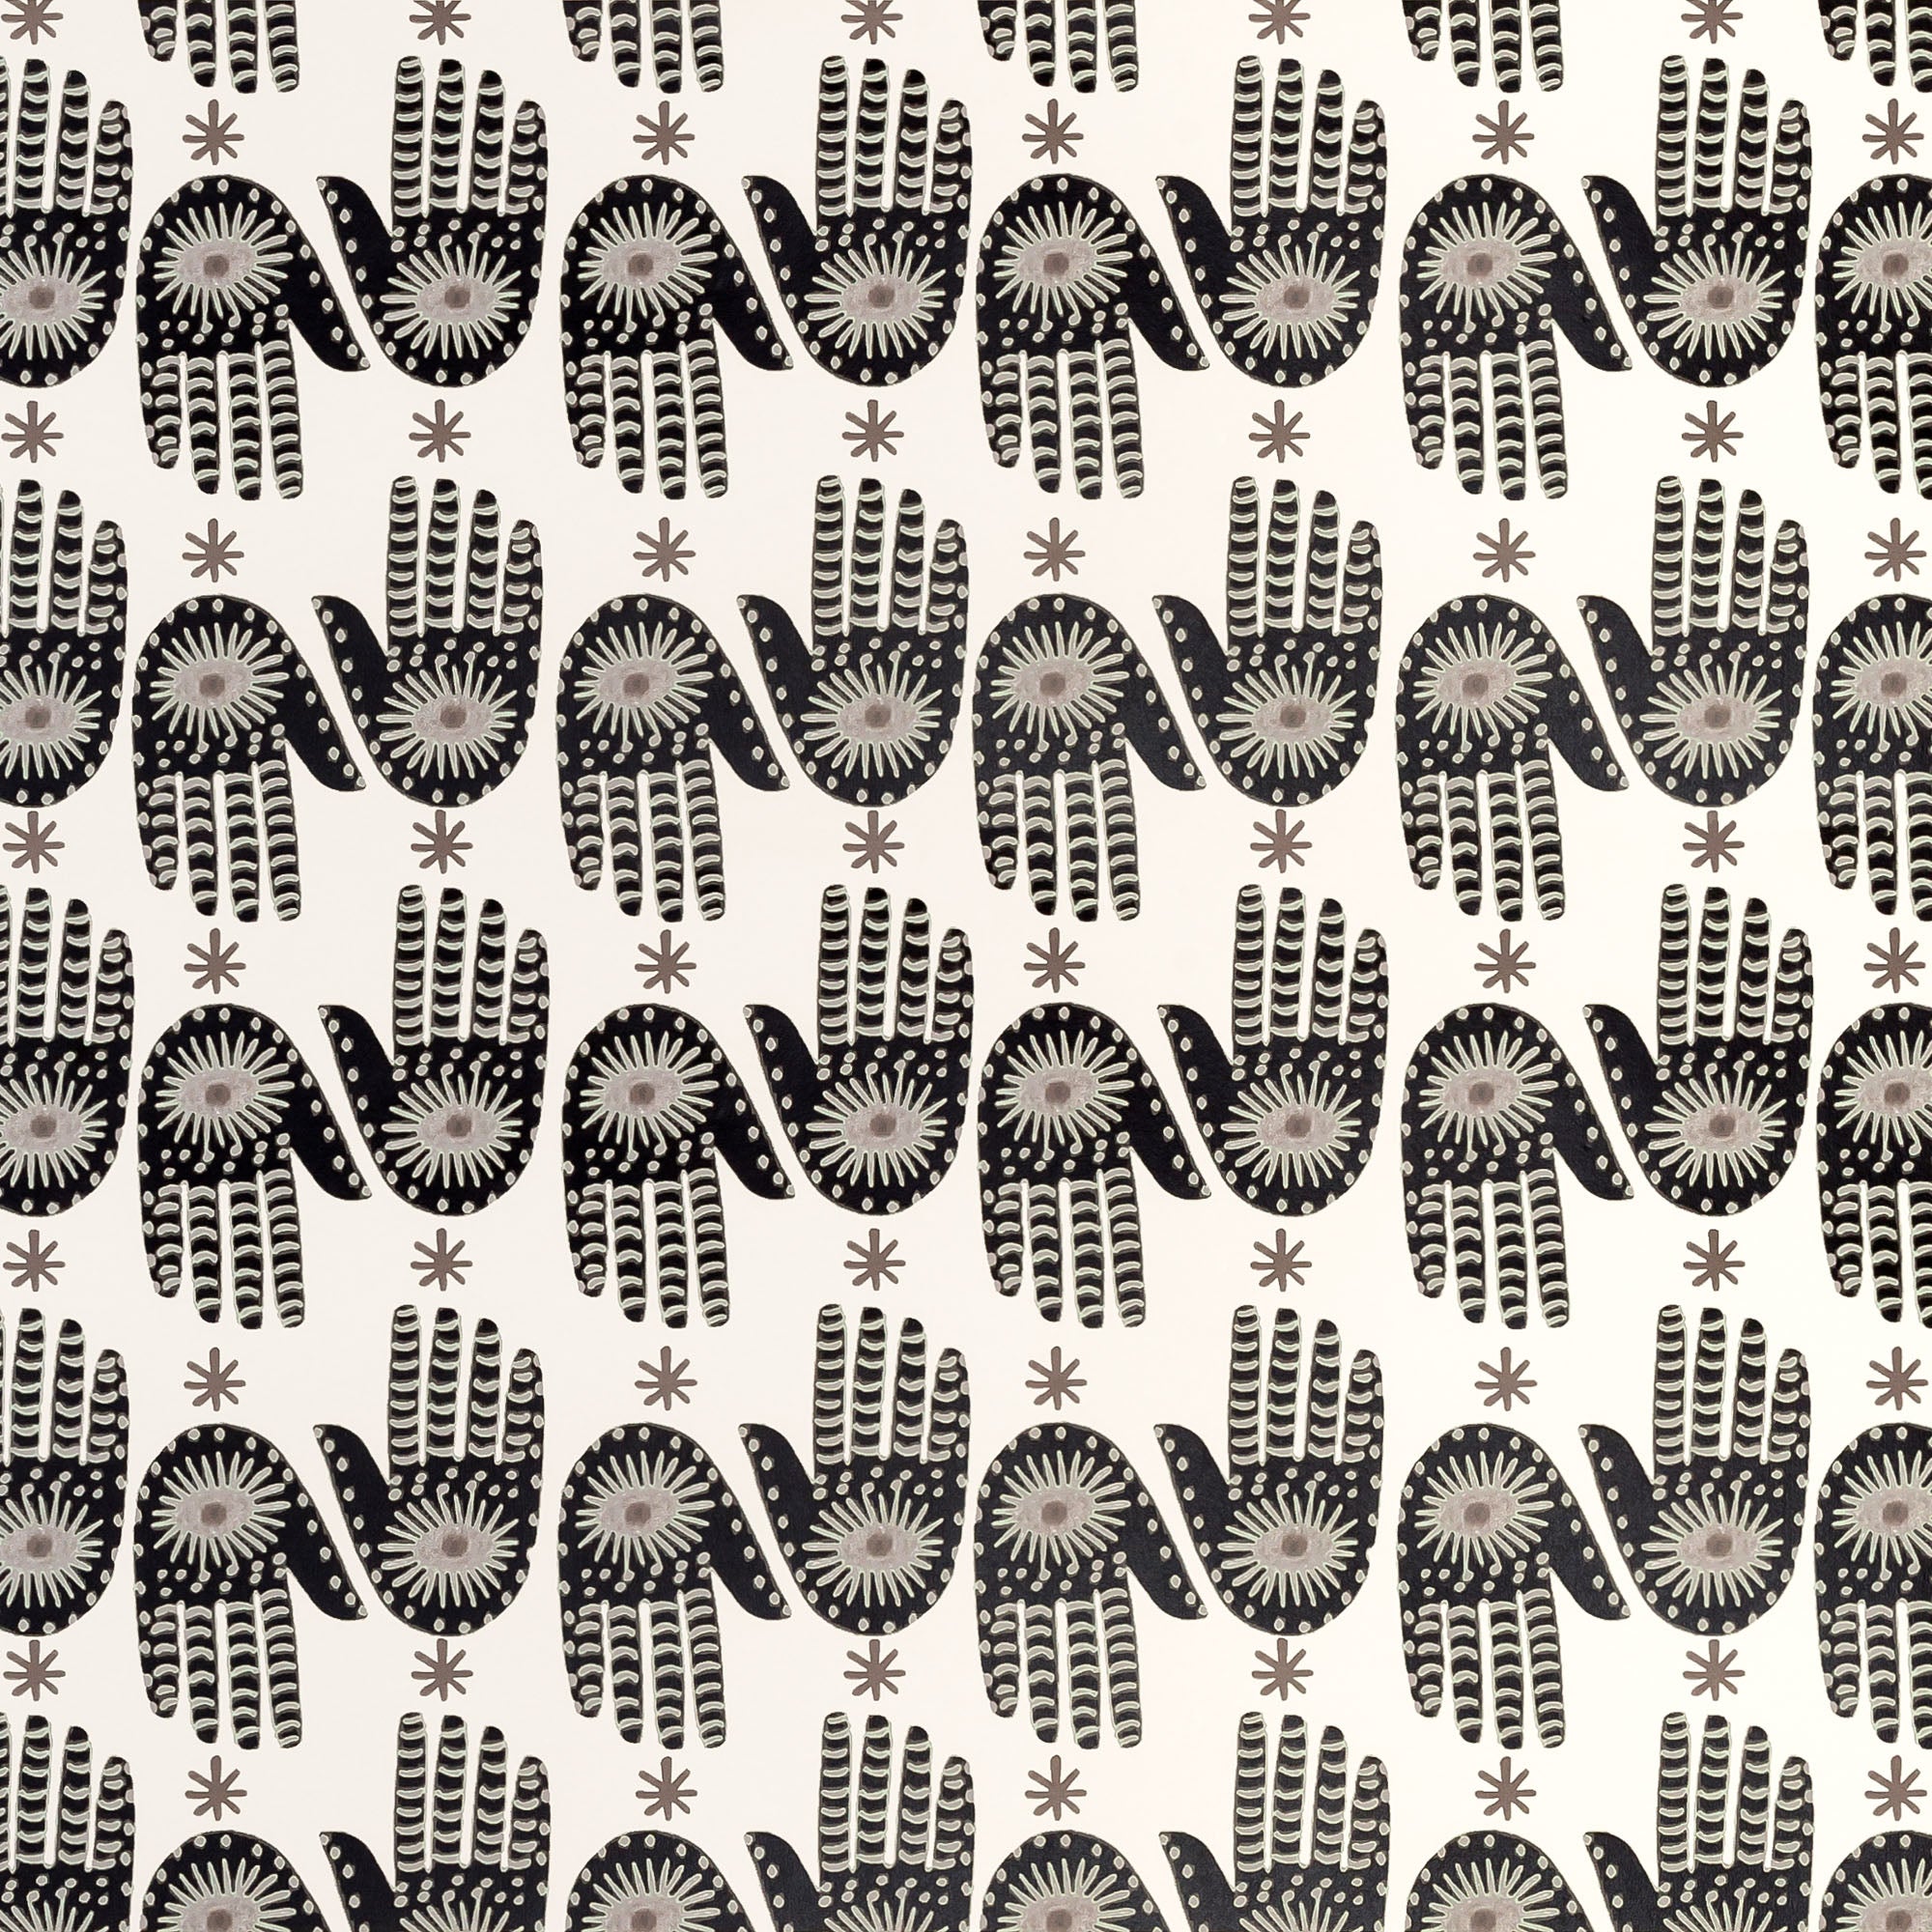 Detail of wallpaper in a playful hamsa hand print in black and brown on a cream field.